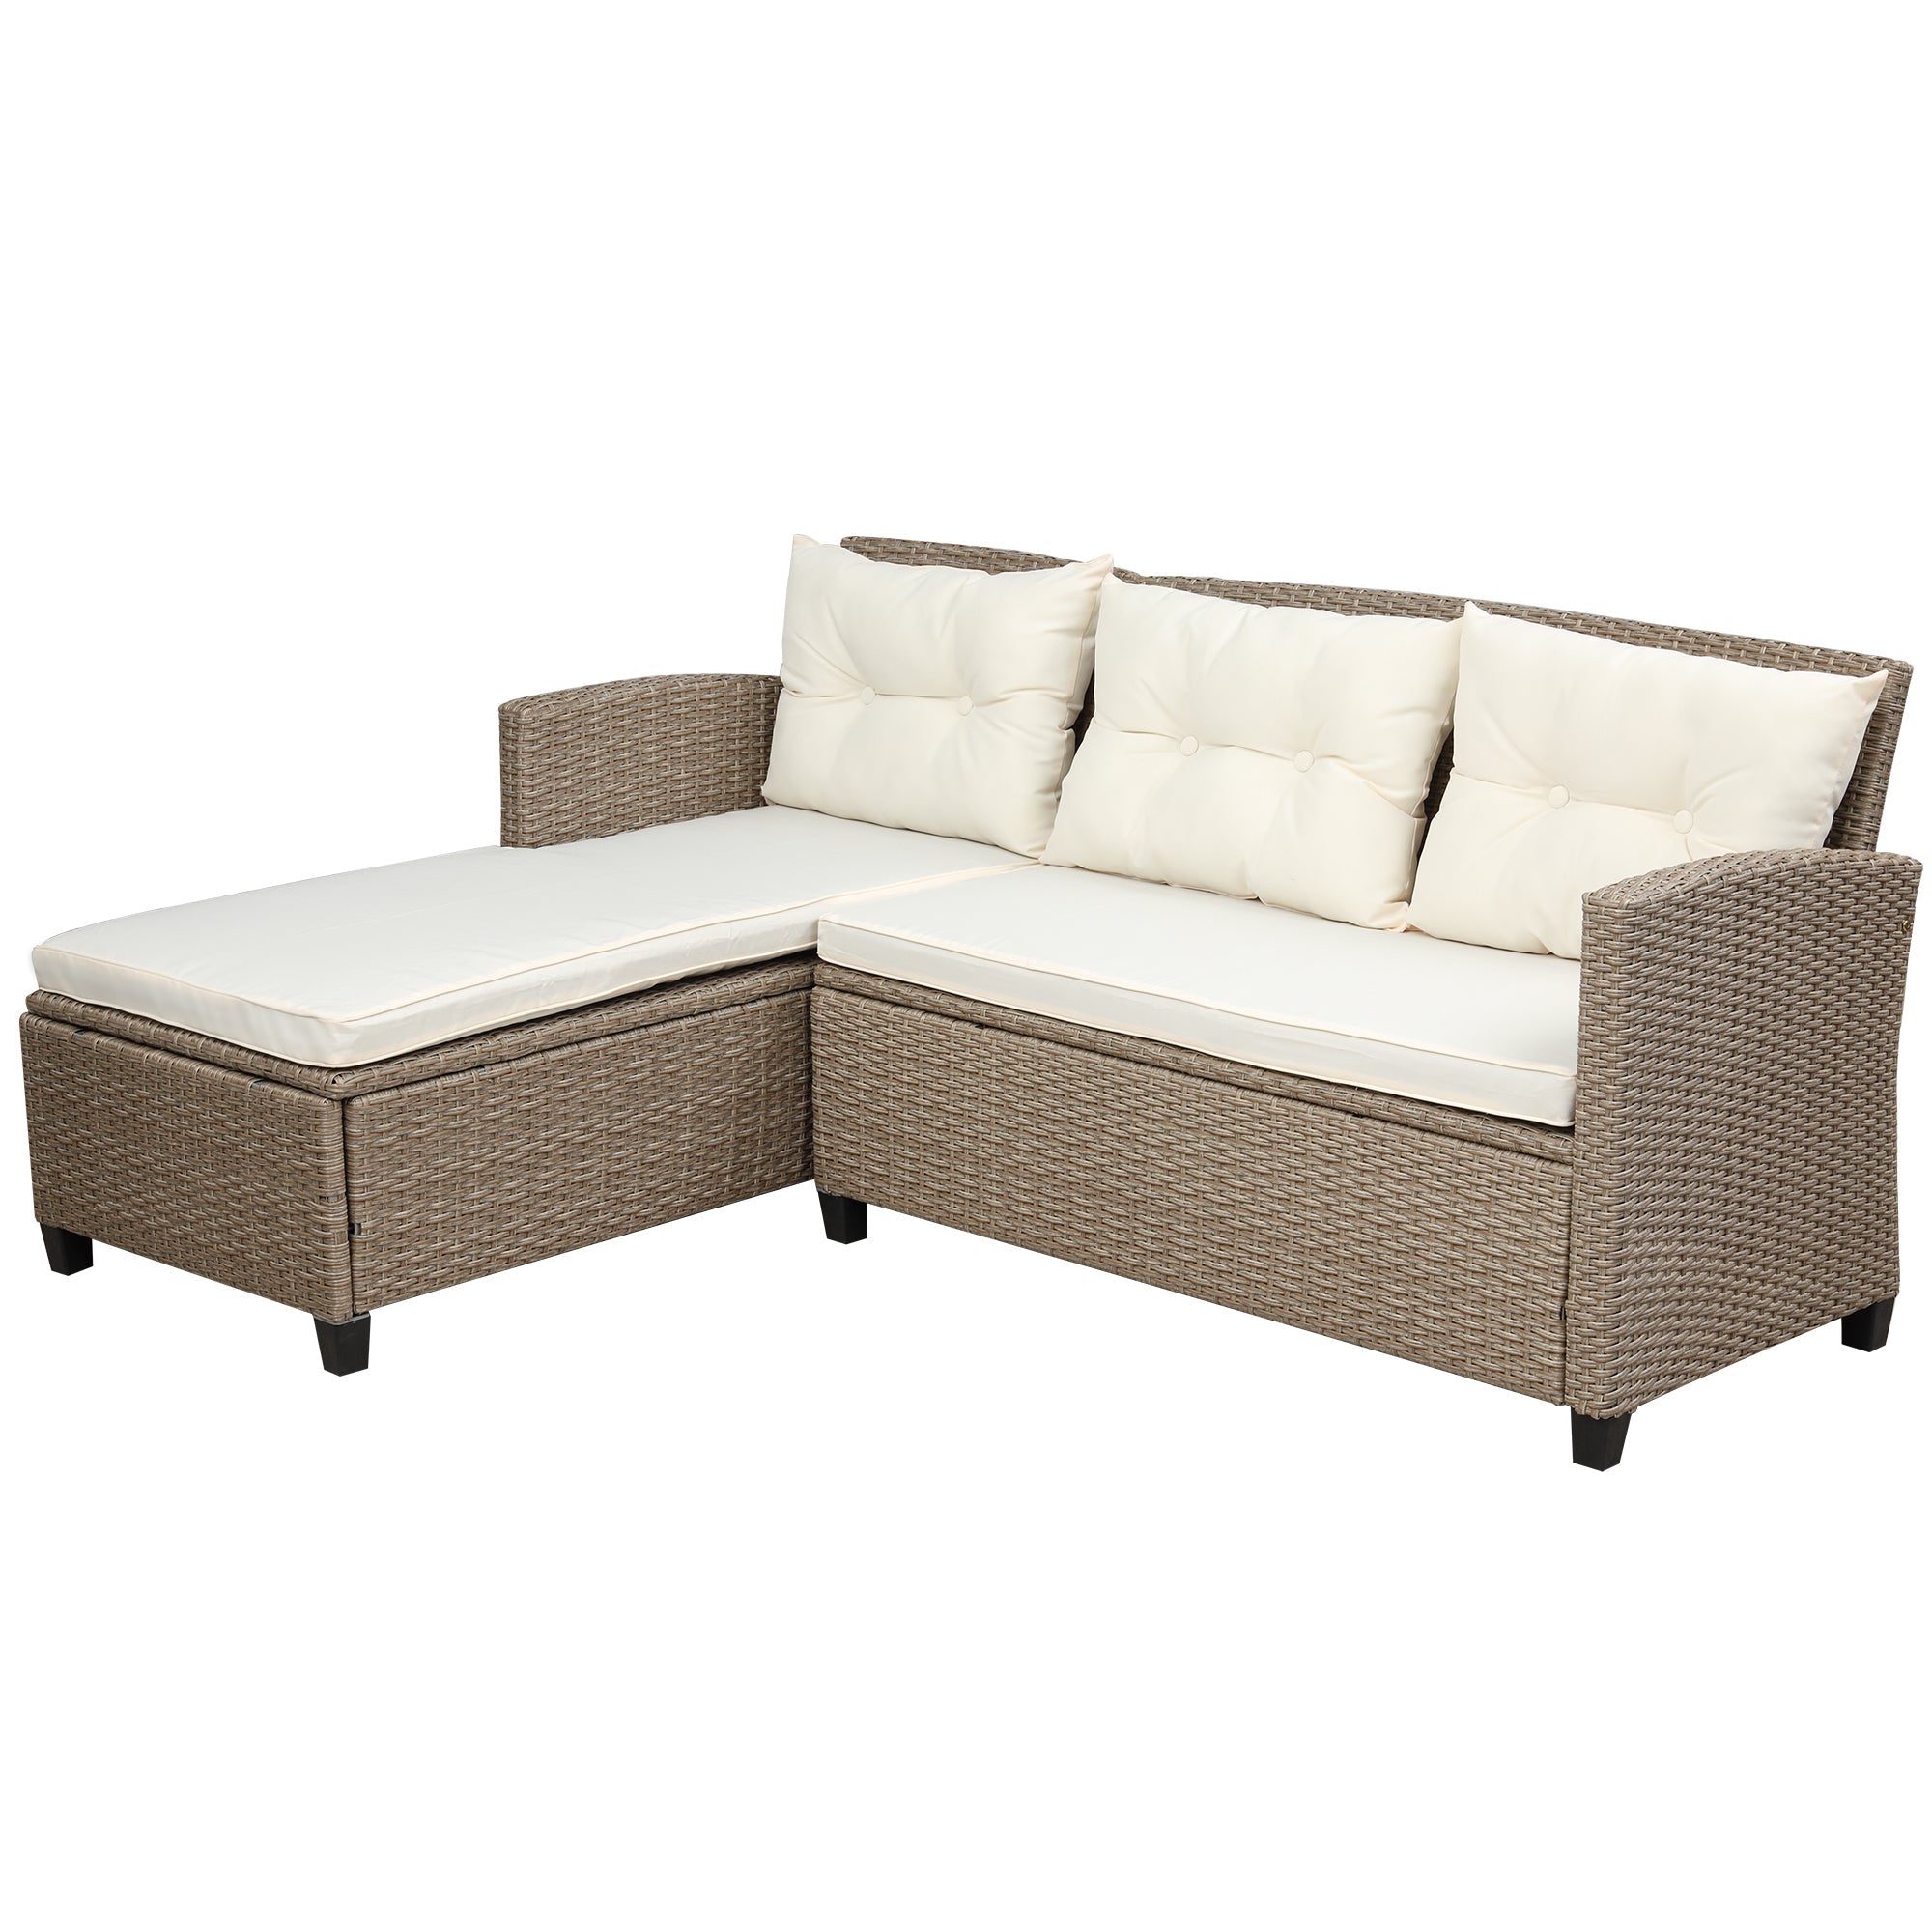 Outdoor Patio Furniture Sets: 4-Piece Conversation Set Wicker Rattan Sectional Sofa with Seat Cushions in Beige Brown | Ideal for Your Outdoor Space-4 Piece Outdoor Sets-American Furniture Outlet